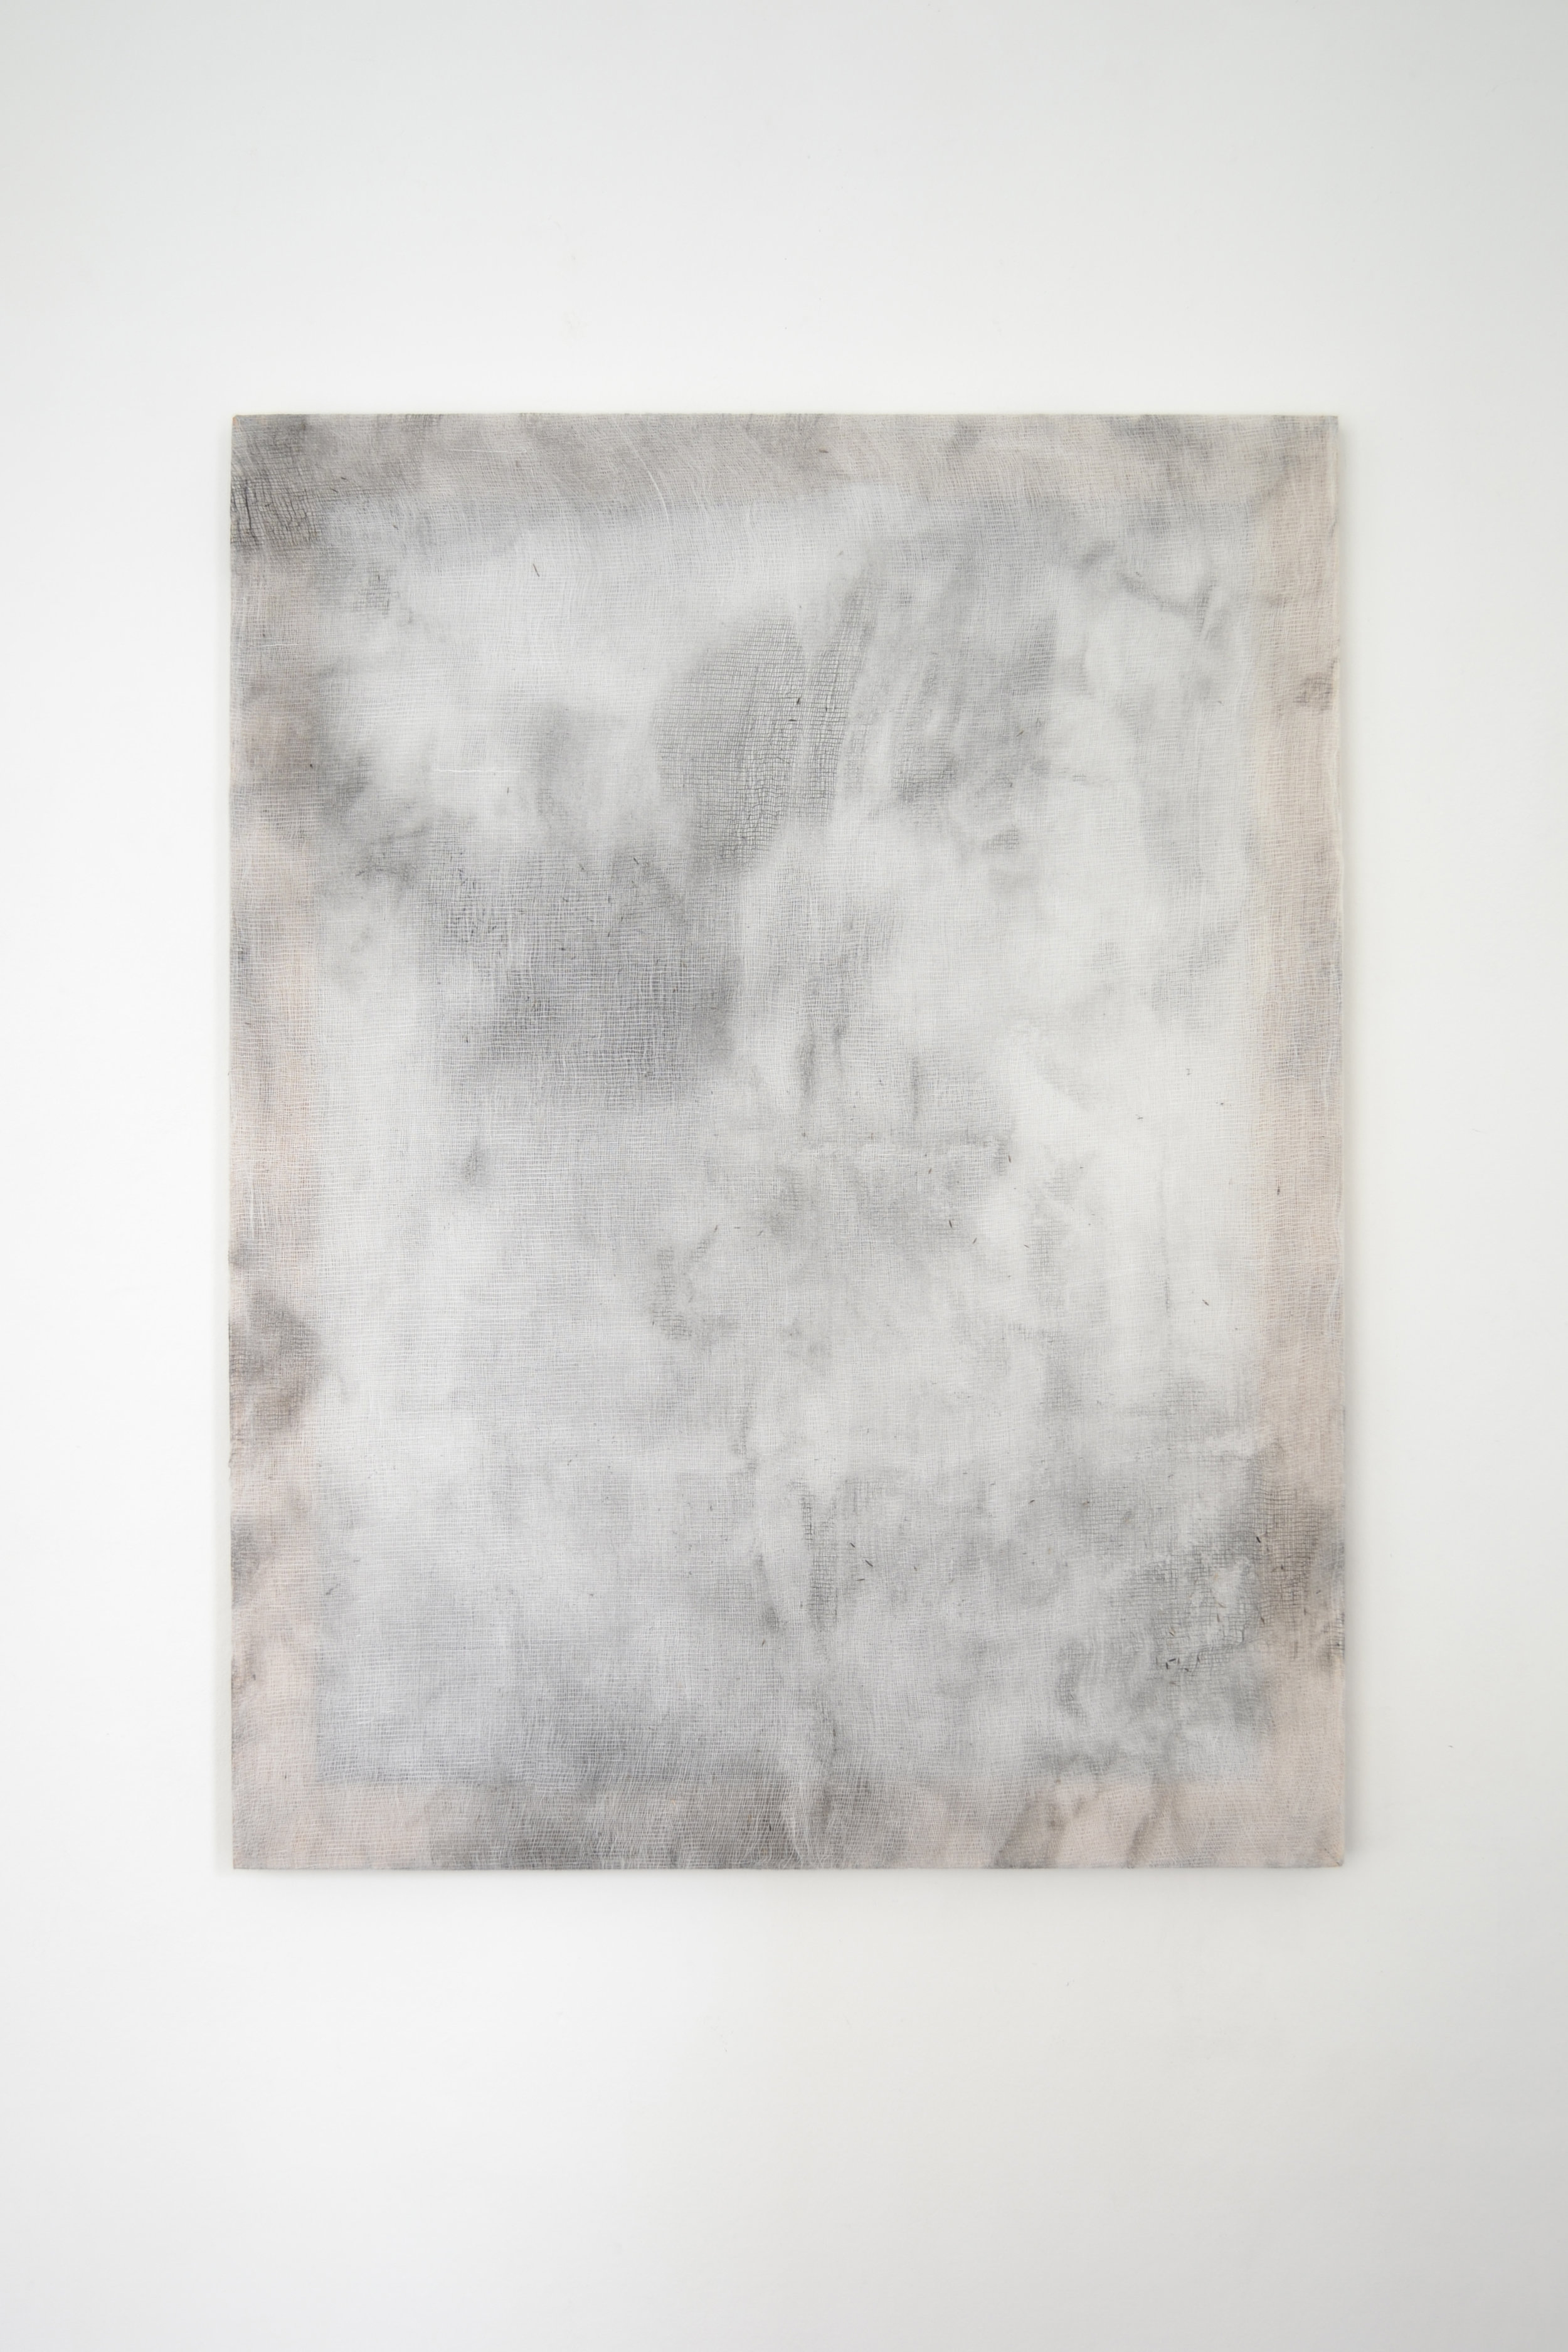   And There They Seemed. Bathed In Silence. All Alone   2019  Enamel Paint and Dirt on Cloth  40 x 30 inches 